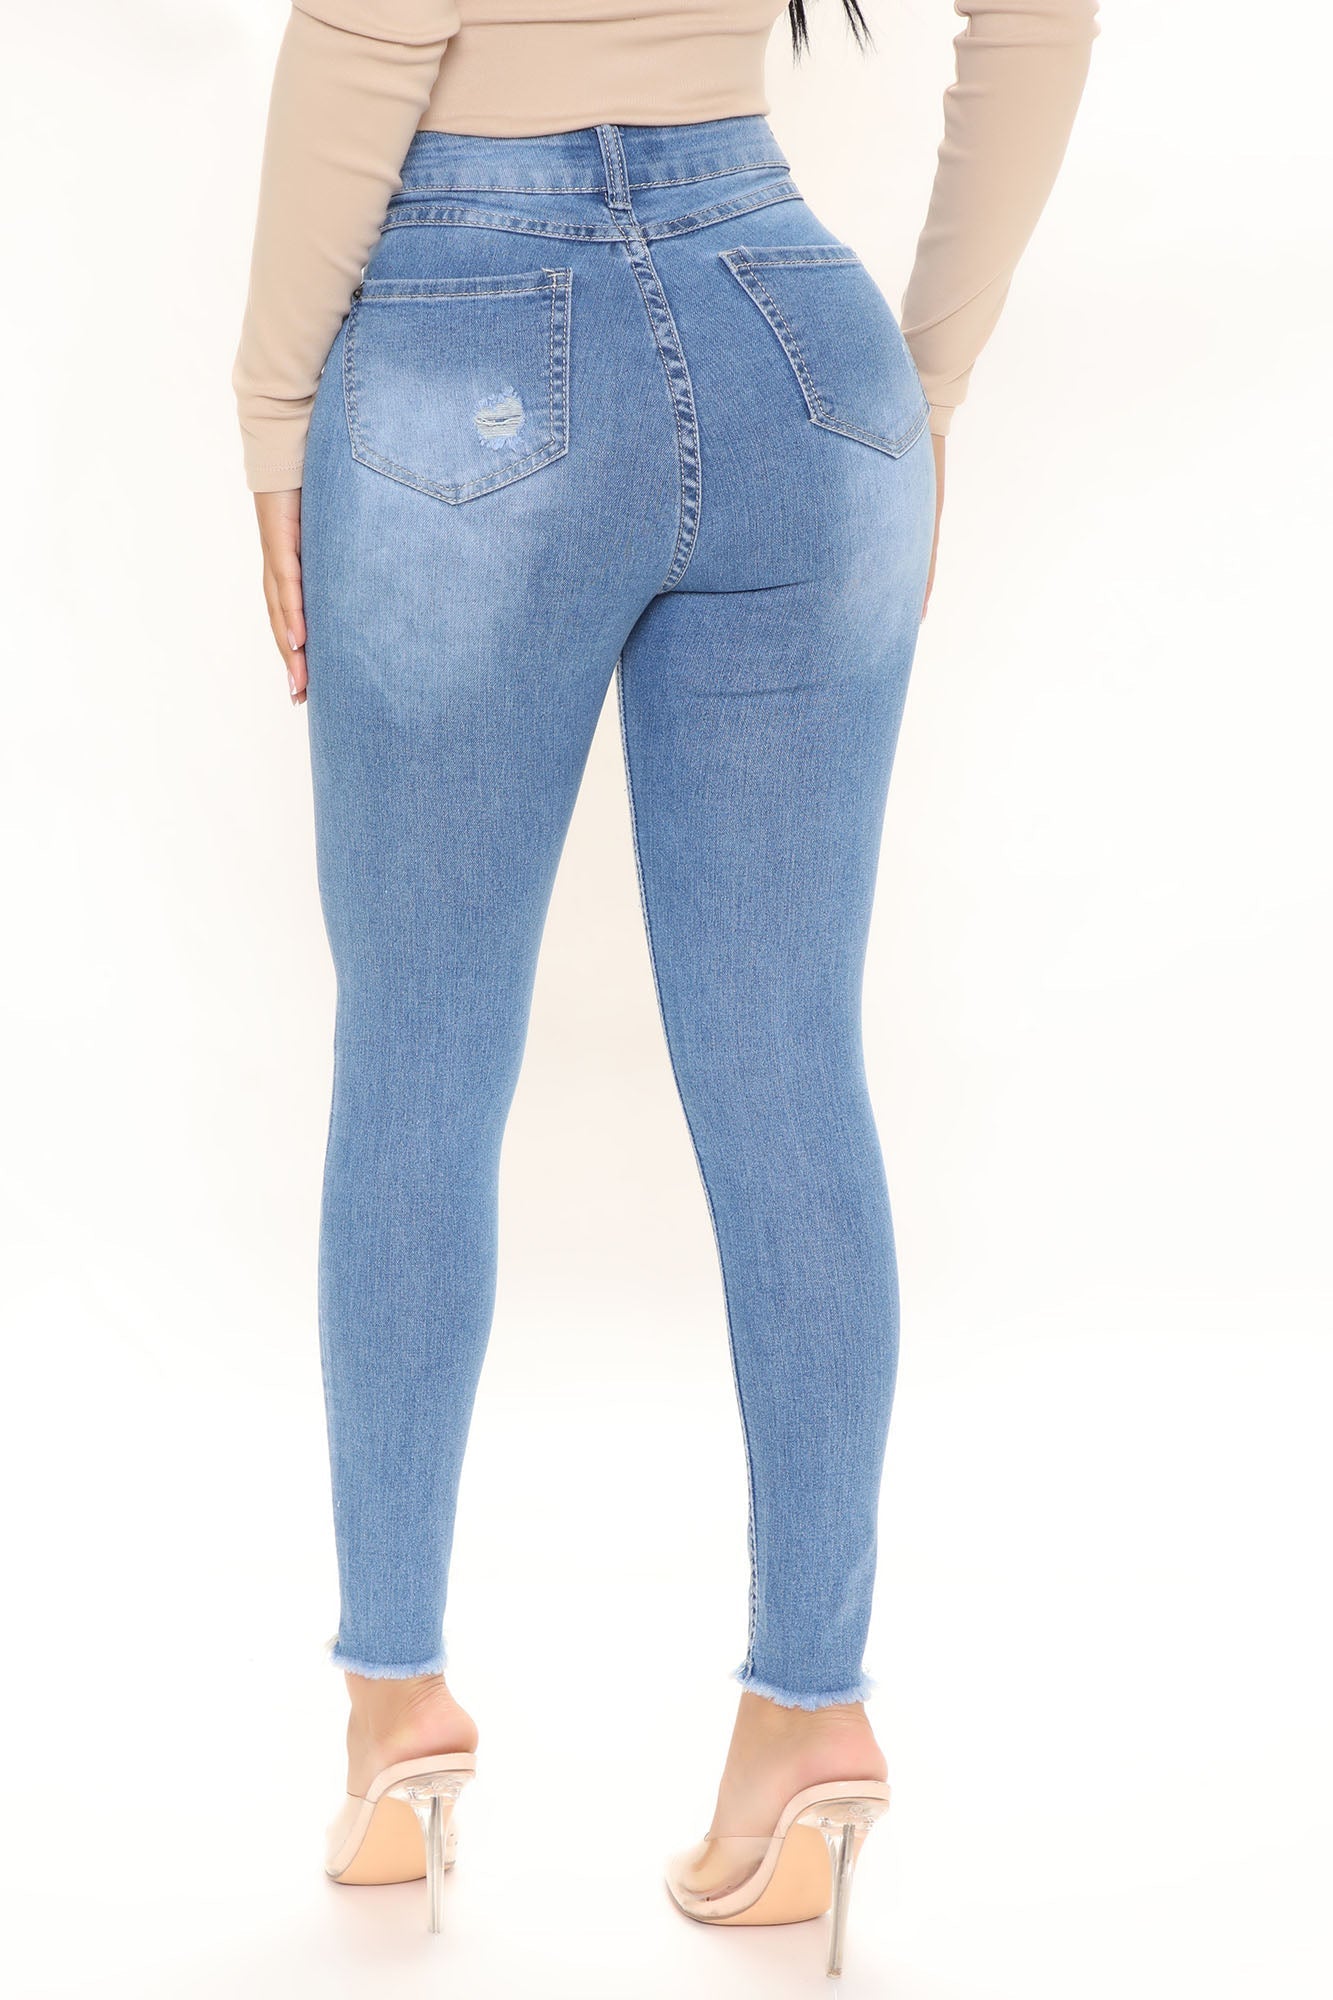 Love Story Ripped Skinny Jeans - Light Blue Wash